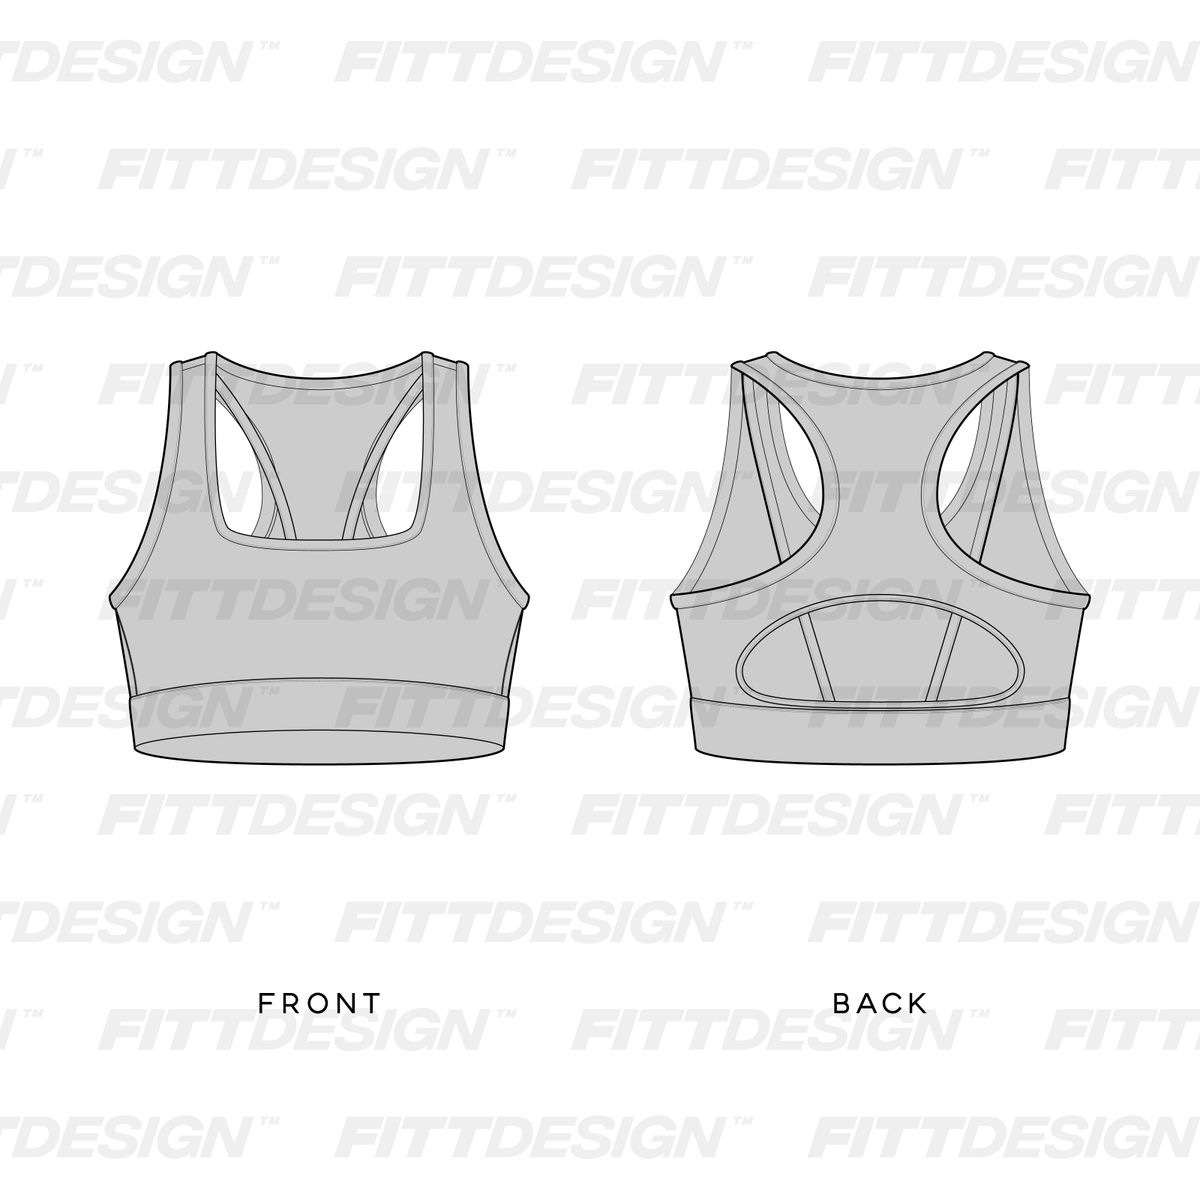 https://www.fittdesign.com/uploads/Product/ladies-high-impact-back-cut-out-strappy-racer-back-sports-bra-tech-pack/77c8a8a9-53a4-4890-8198-7d447a42a82b/ladies-high-impact-back-cut-out-strappy-racer-back-sports-bra-flat-views-mod=w=1200,h=1200.jpg